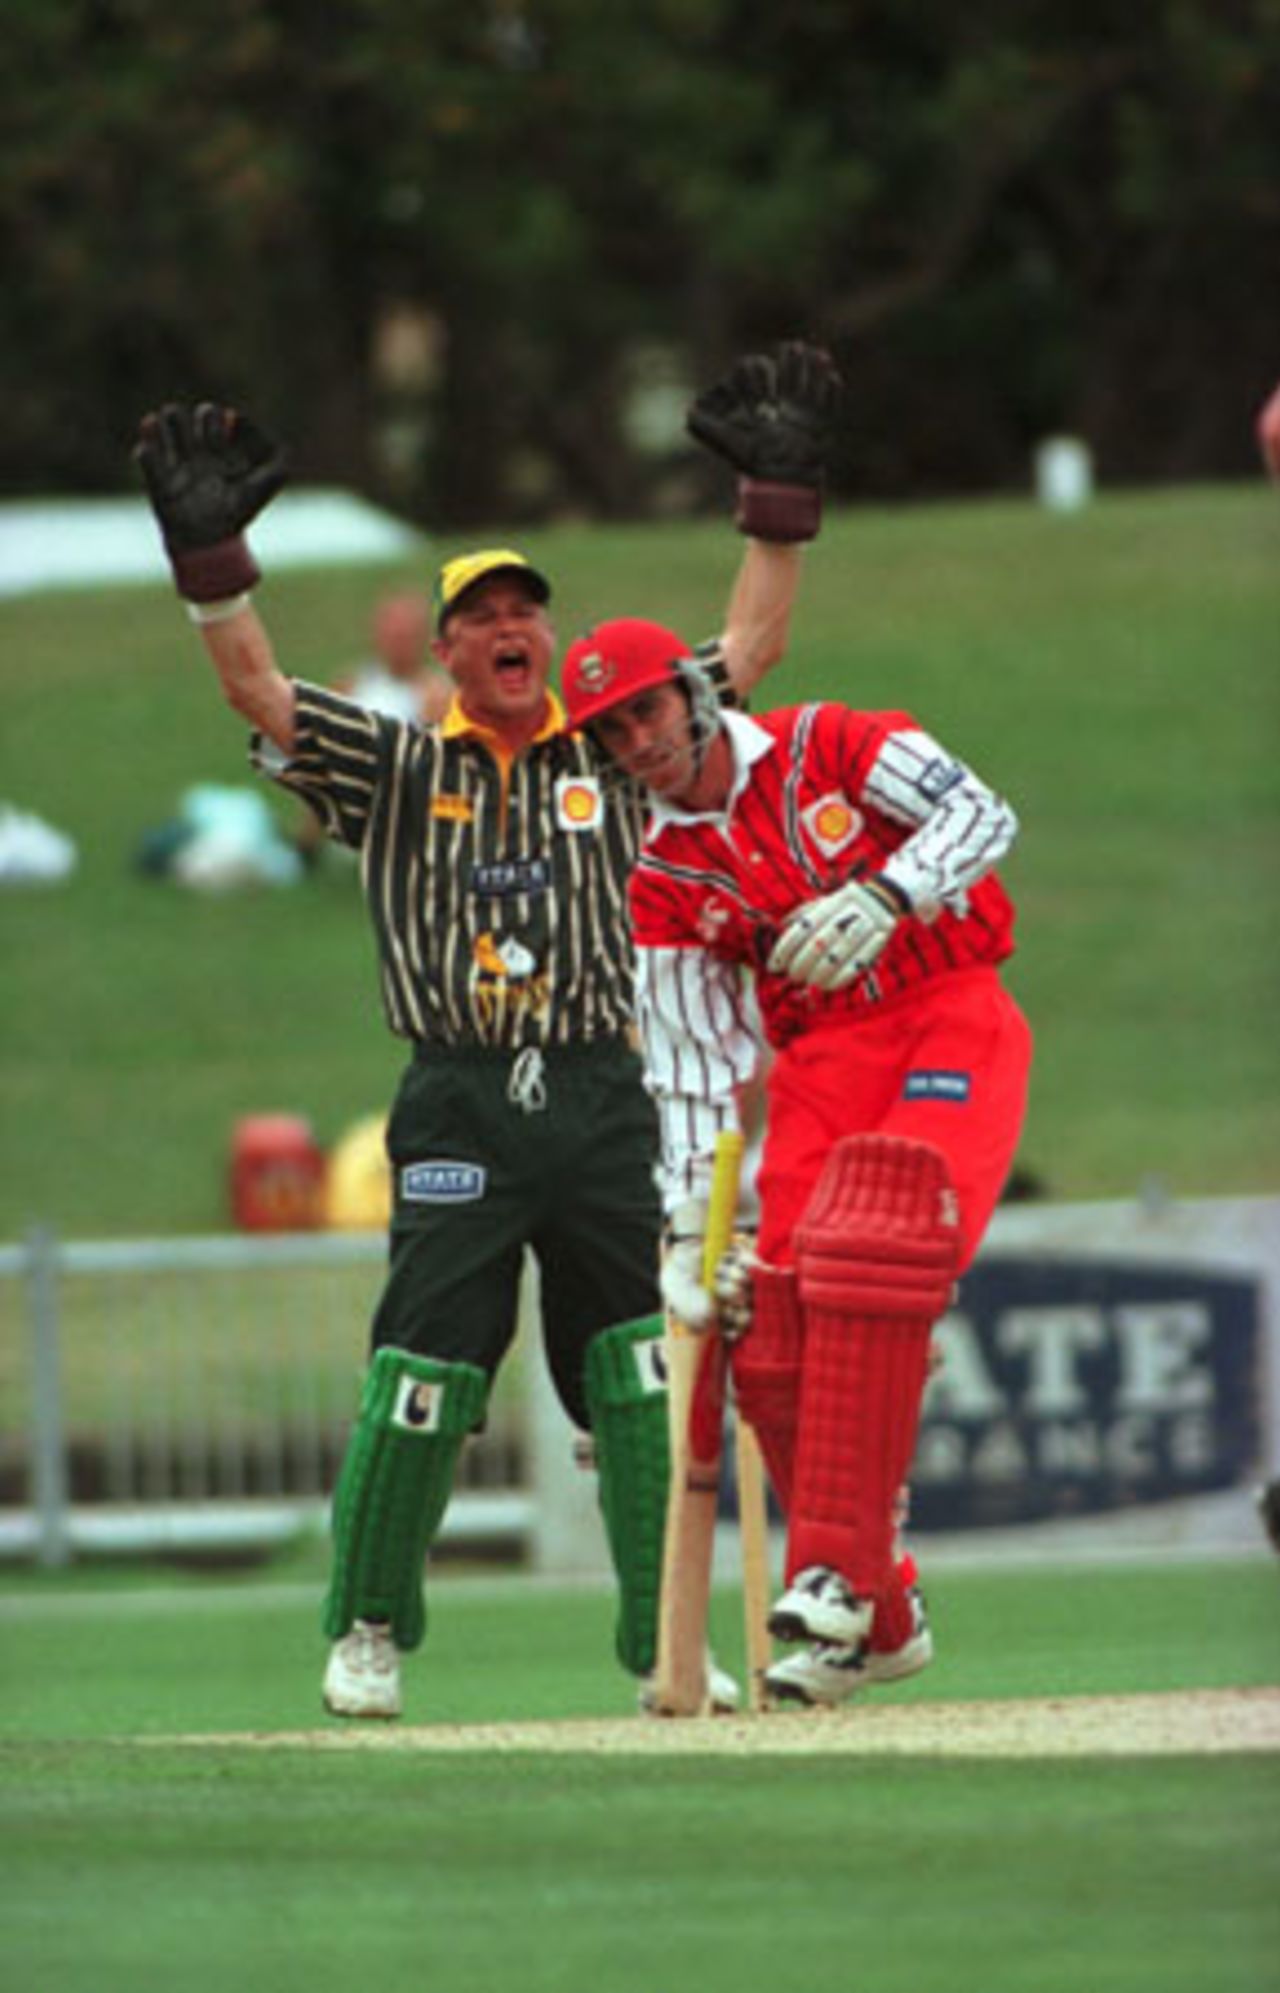 Central Districts wicket-keeper Bevan Griggs successfully appeals as Canterbury batsman Gary Stead is trapped lbw by off spinner Glen Sulzberger for 12. 1st Shell Cup Final: Central Districts v Canterbury at McLean Park, Napier, 24 January 2001.